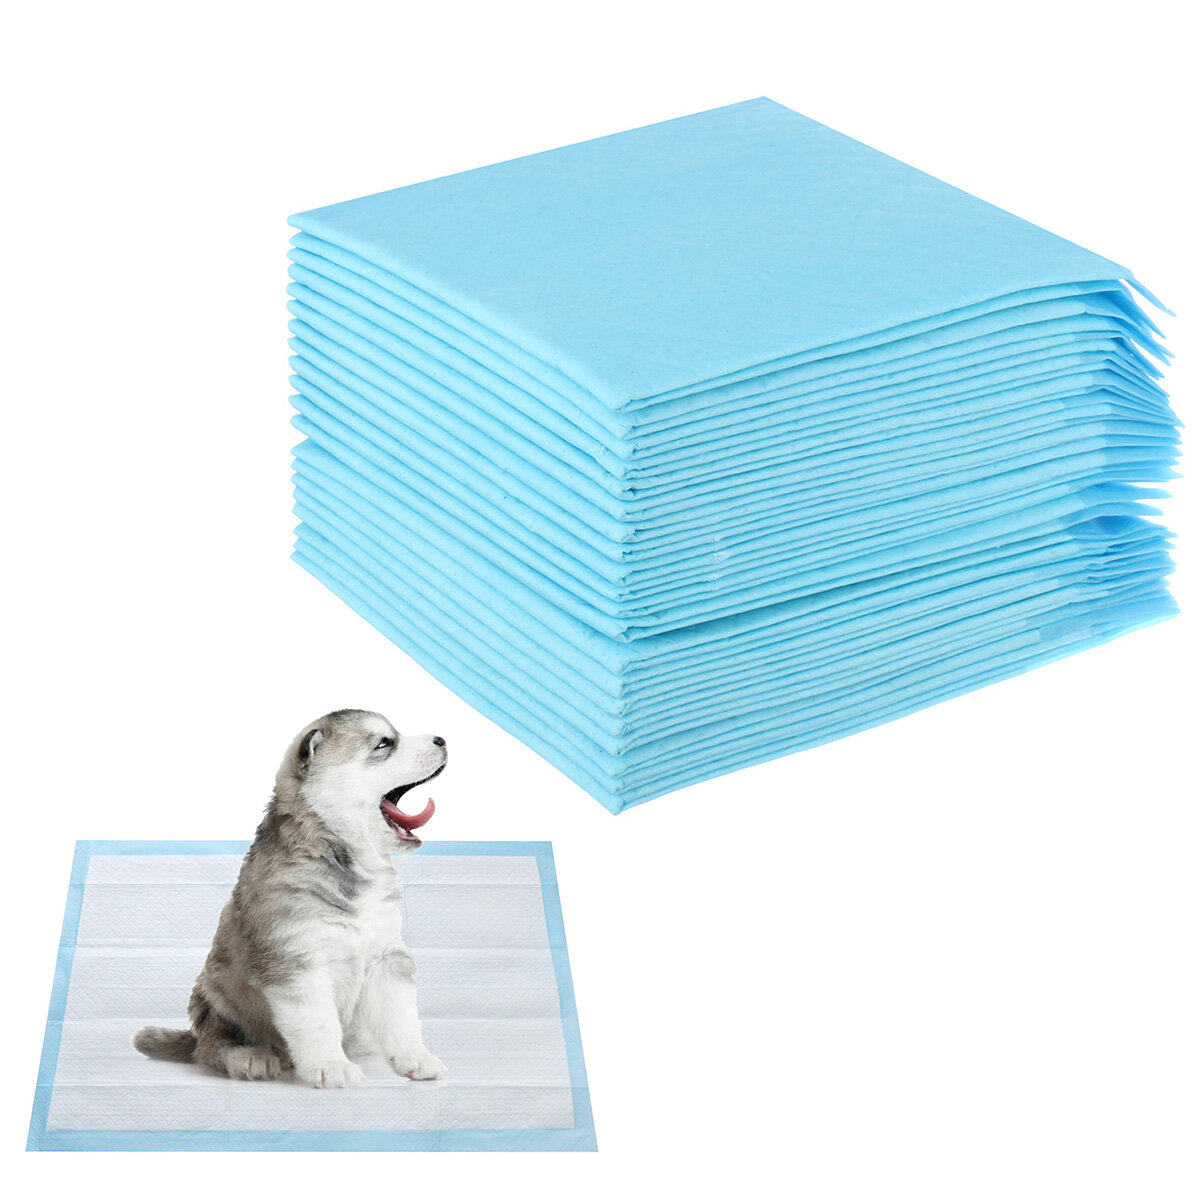 100/50/40/20 Pet Diapers Deodorant Thickening Absorbent Diapers Disposable Training Urine Pad Dog Diapers-heyidear